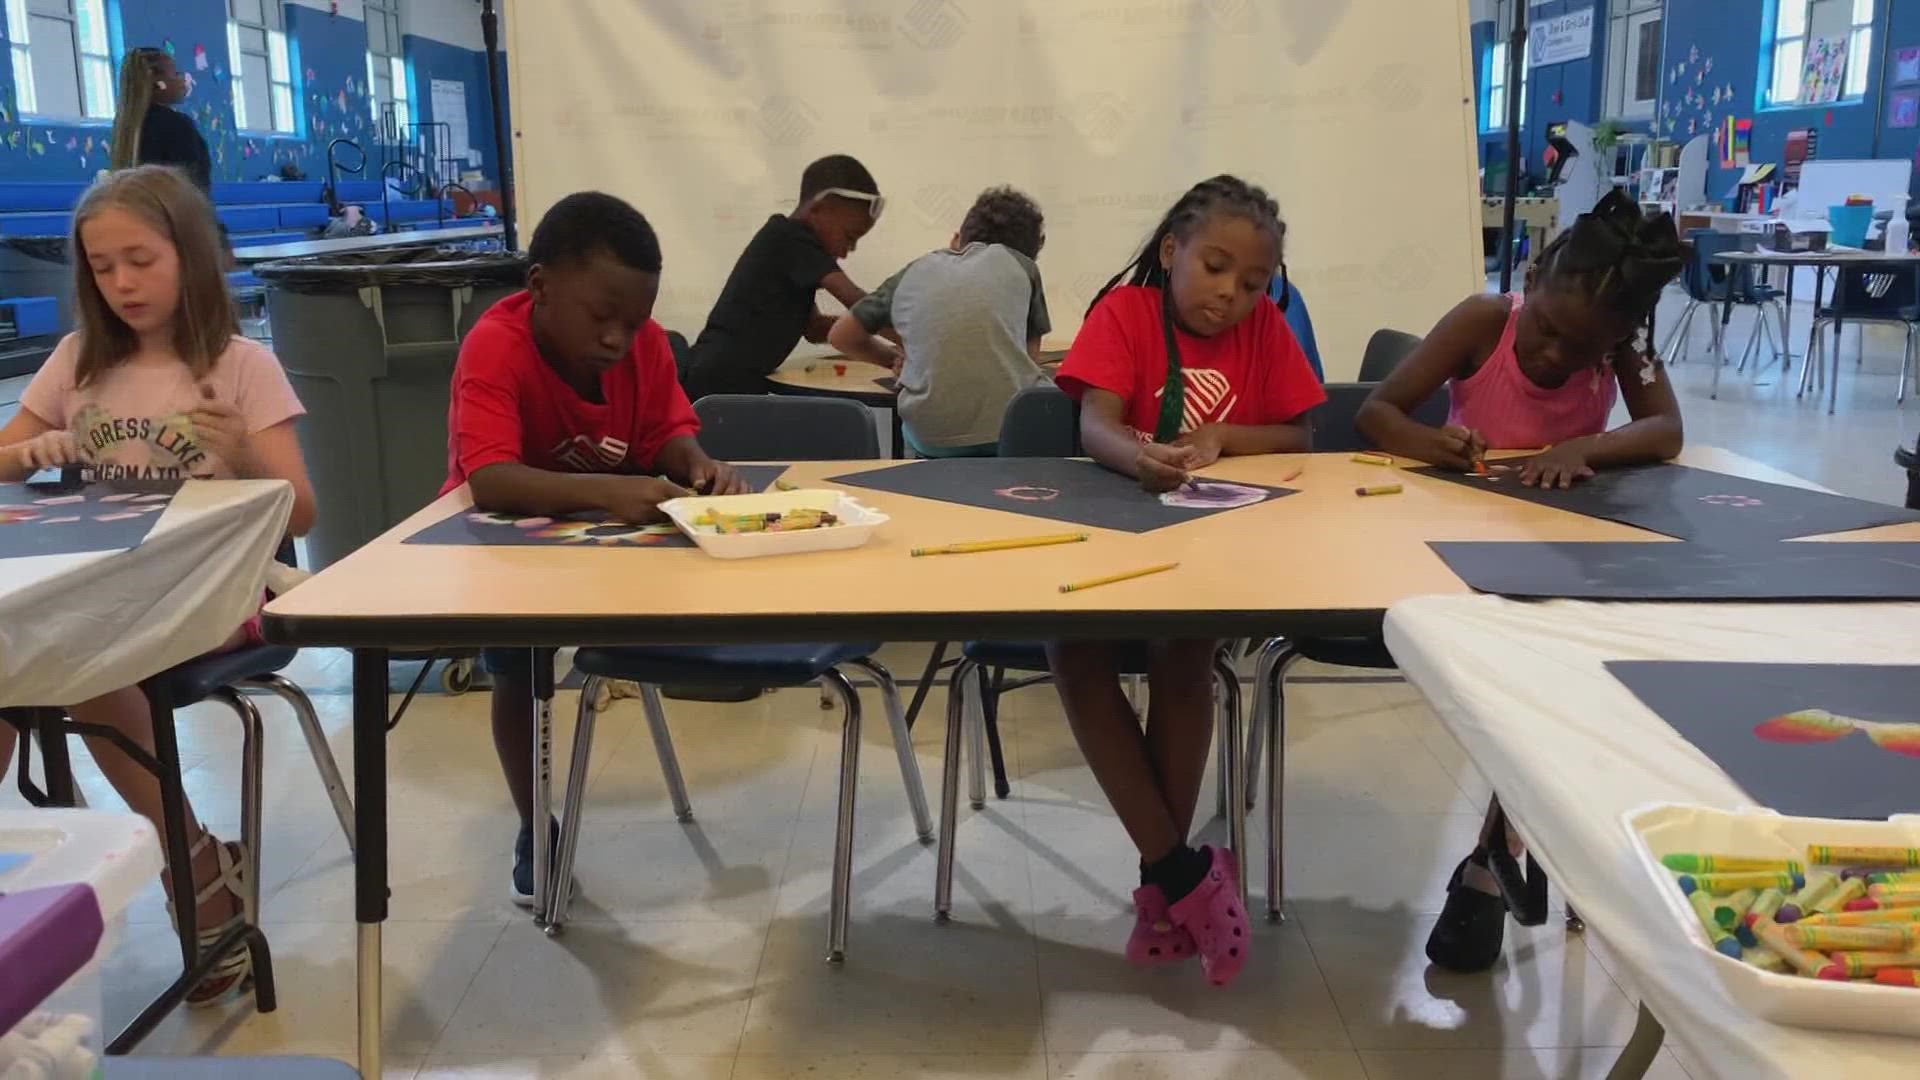 The Boys and Girls Club of Metro Louisiana has extracurricular activities designed to promote positive character development.